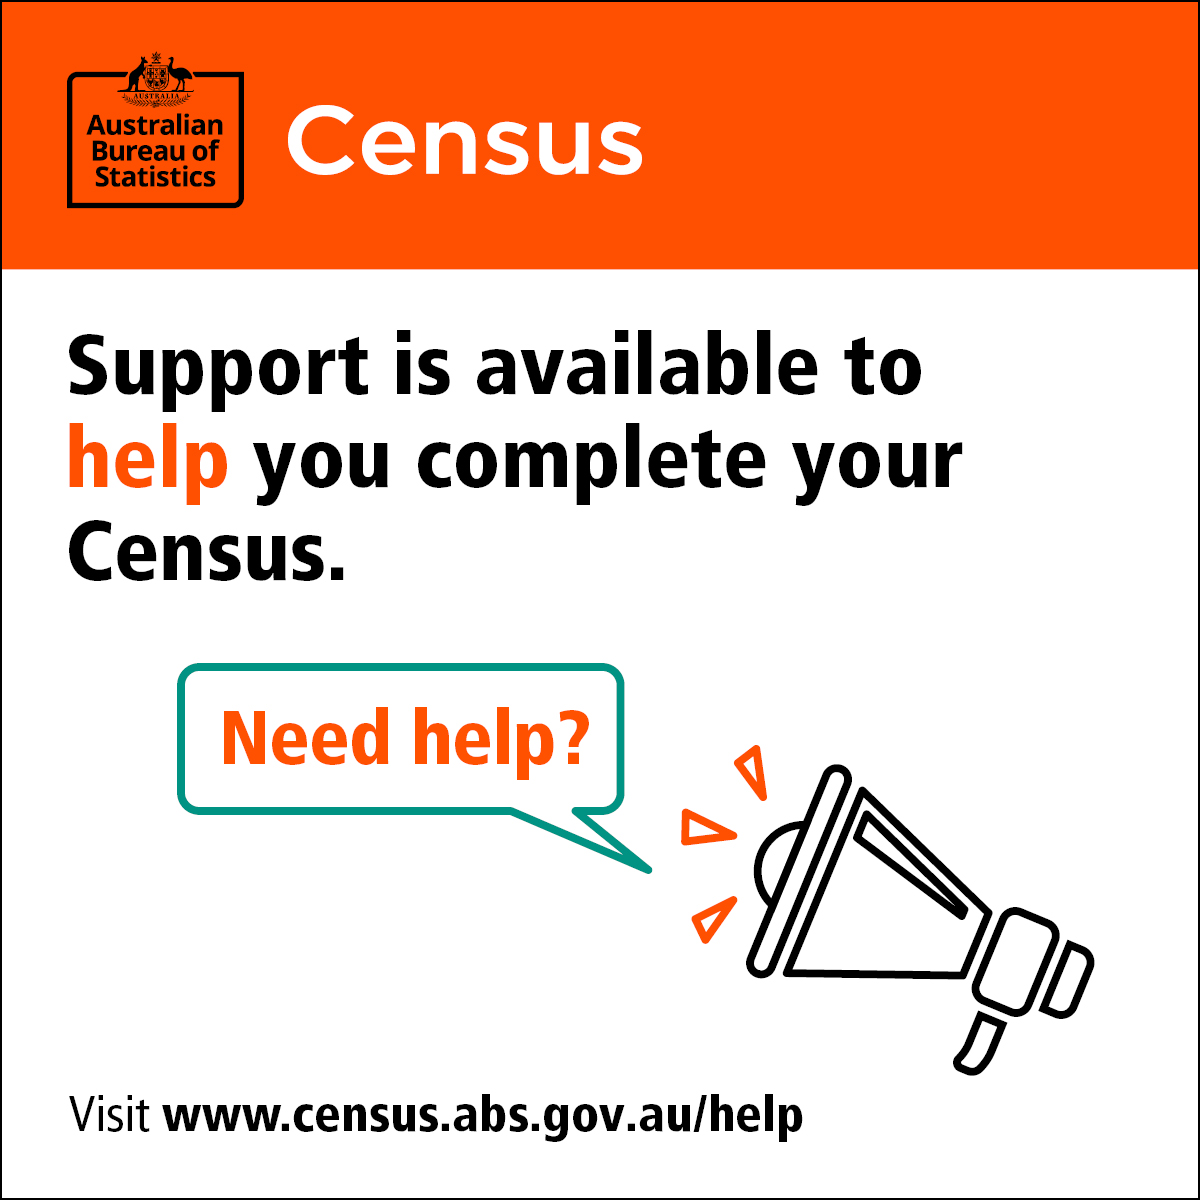 ABS "Support is available to help you complete your census. Visit www.census.abs.gov.au/help"